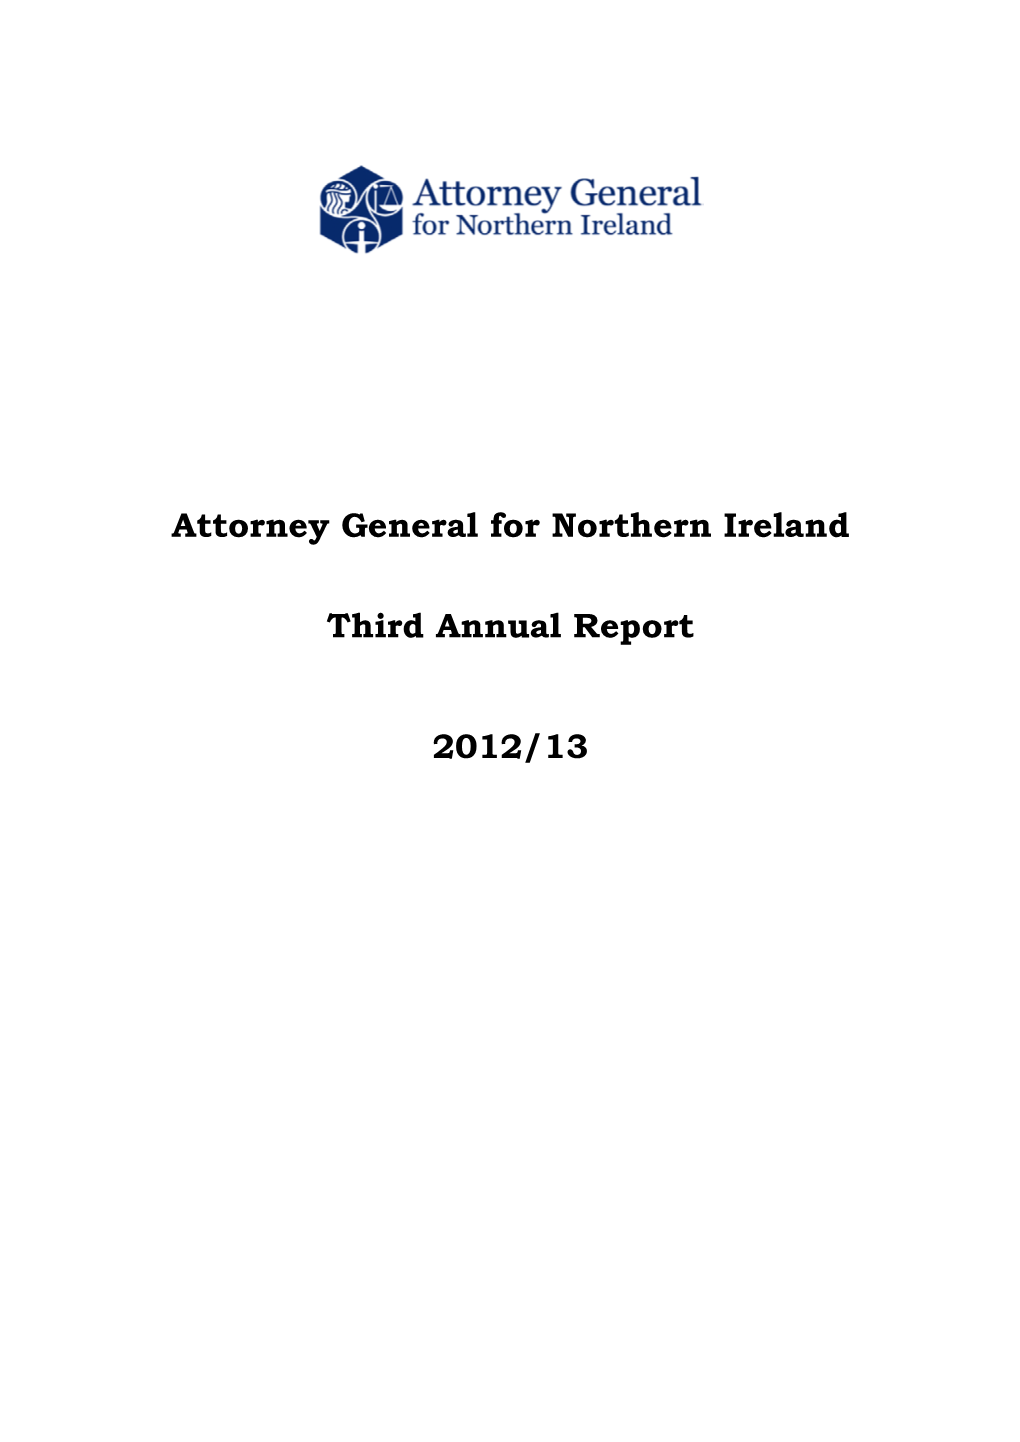 Attorney General for Northern Ireland Third Annual Report 2012/13